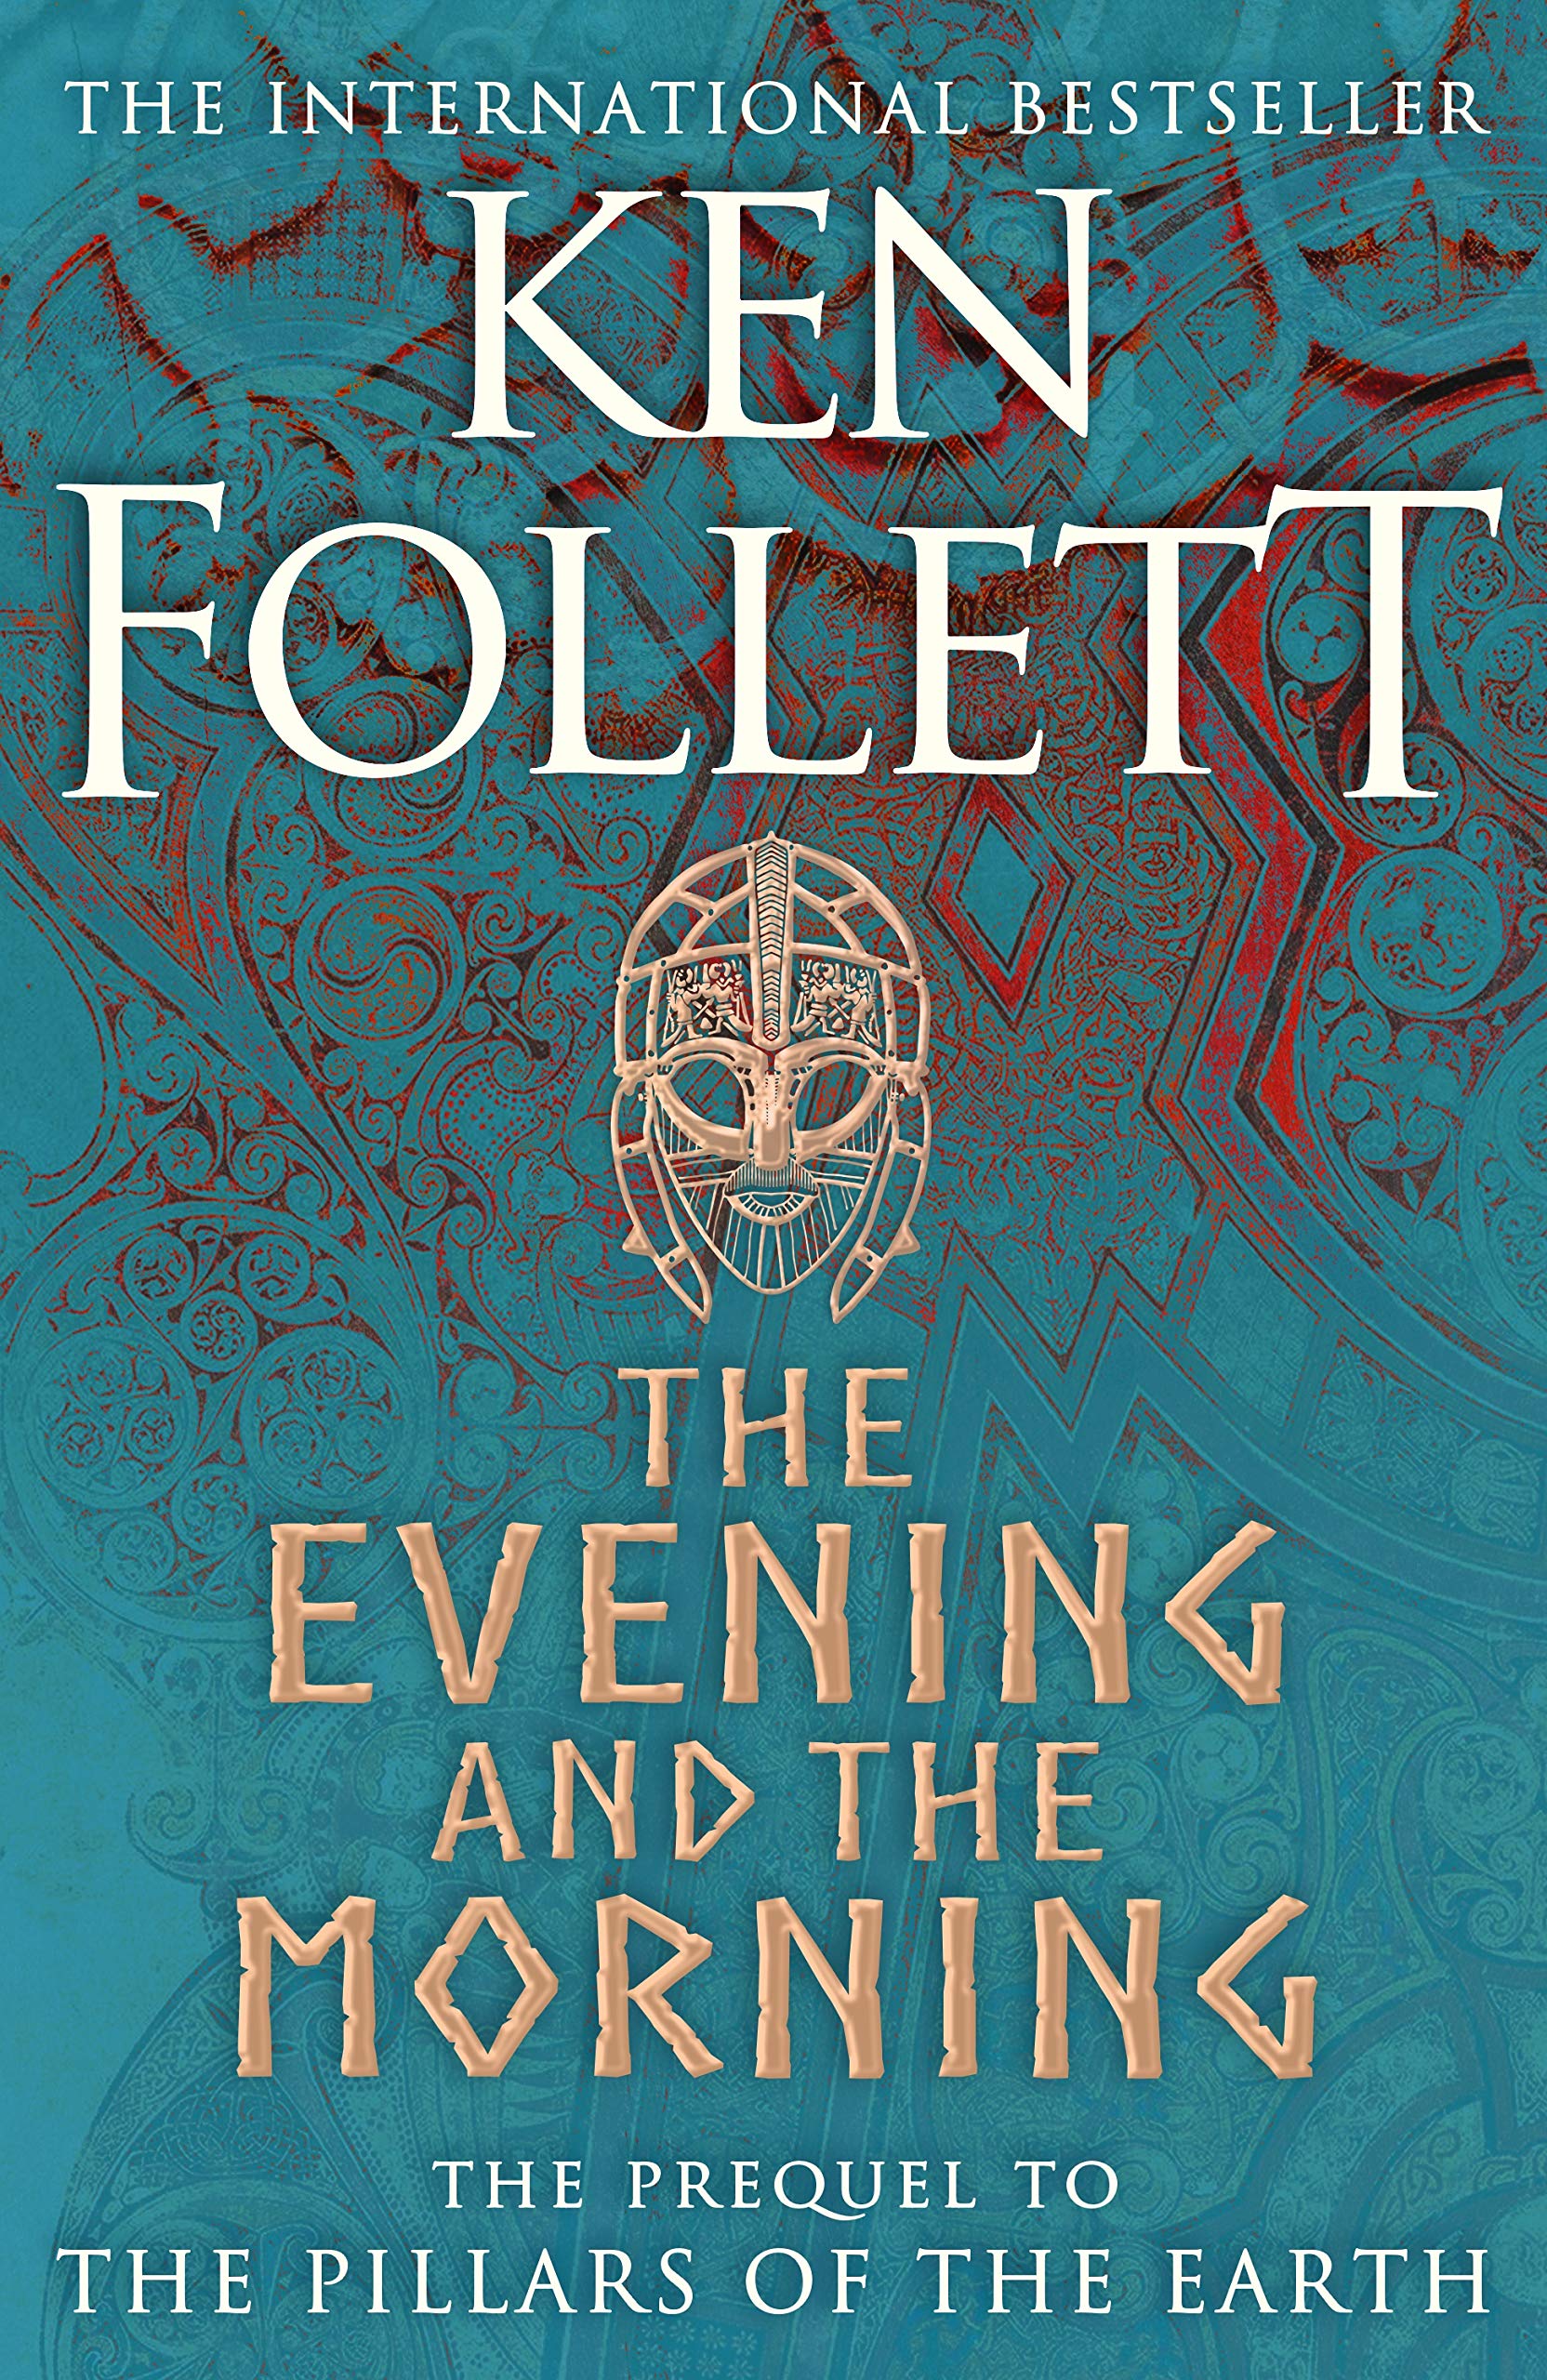 Follett, Ken - The Evening and the Morning: The Prequel to The Pillars of the Earth, A Kingsbridge Novel